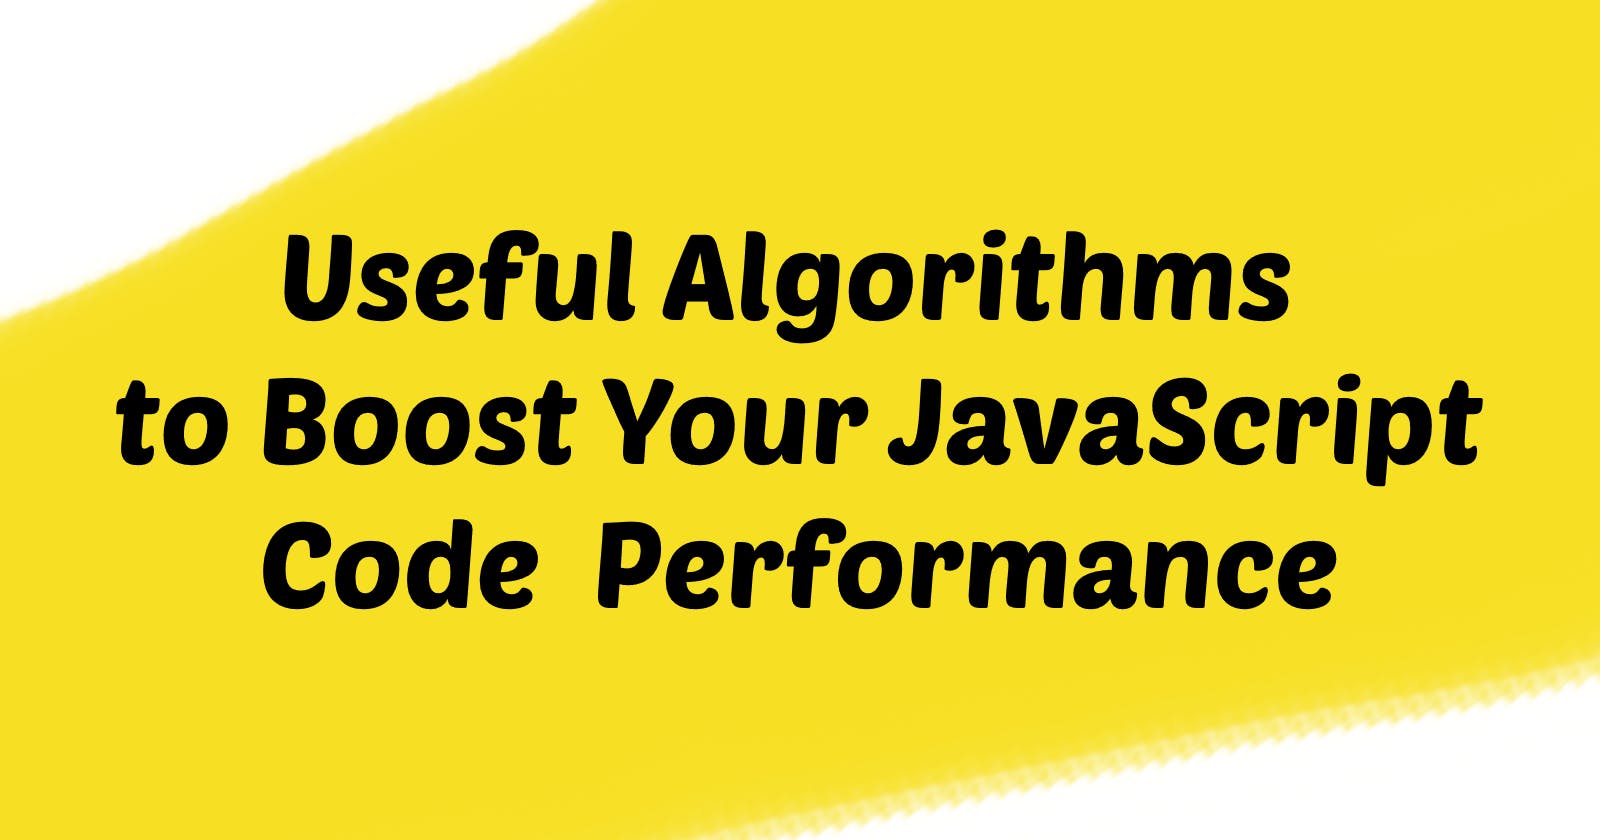 Useful Algorithms to Boost Your JavaScript Code Performance